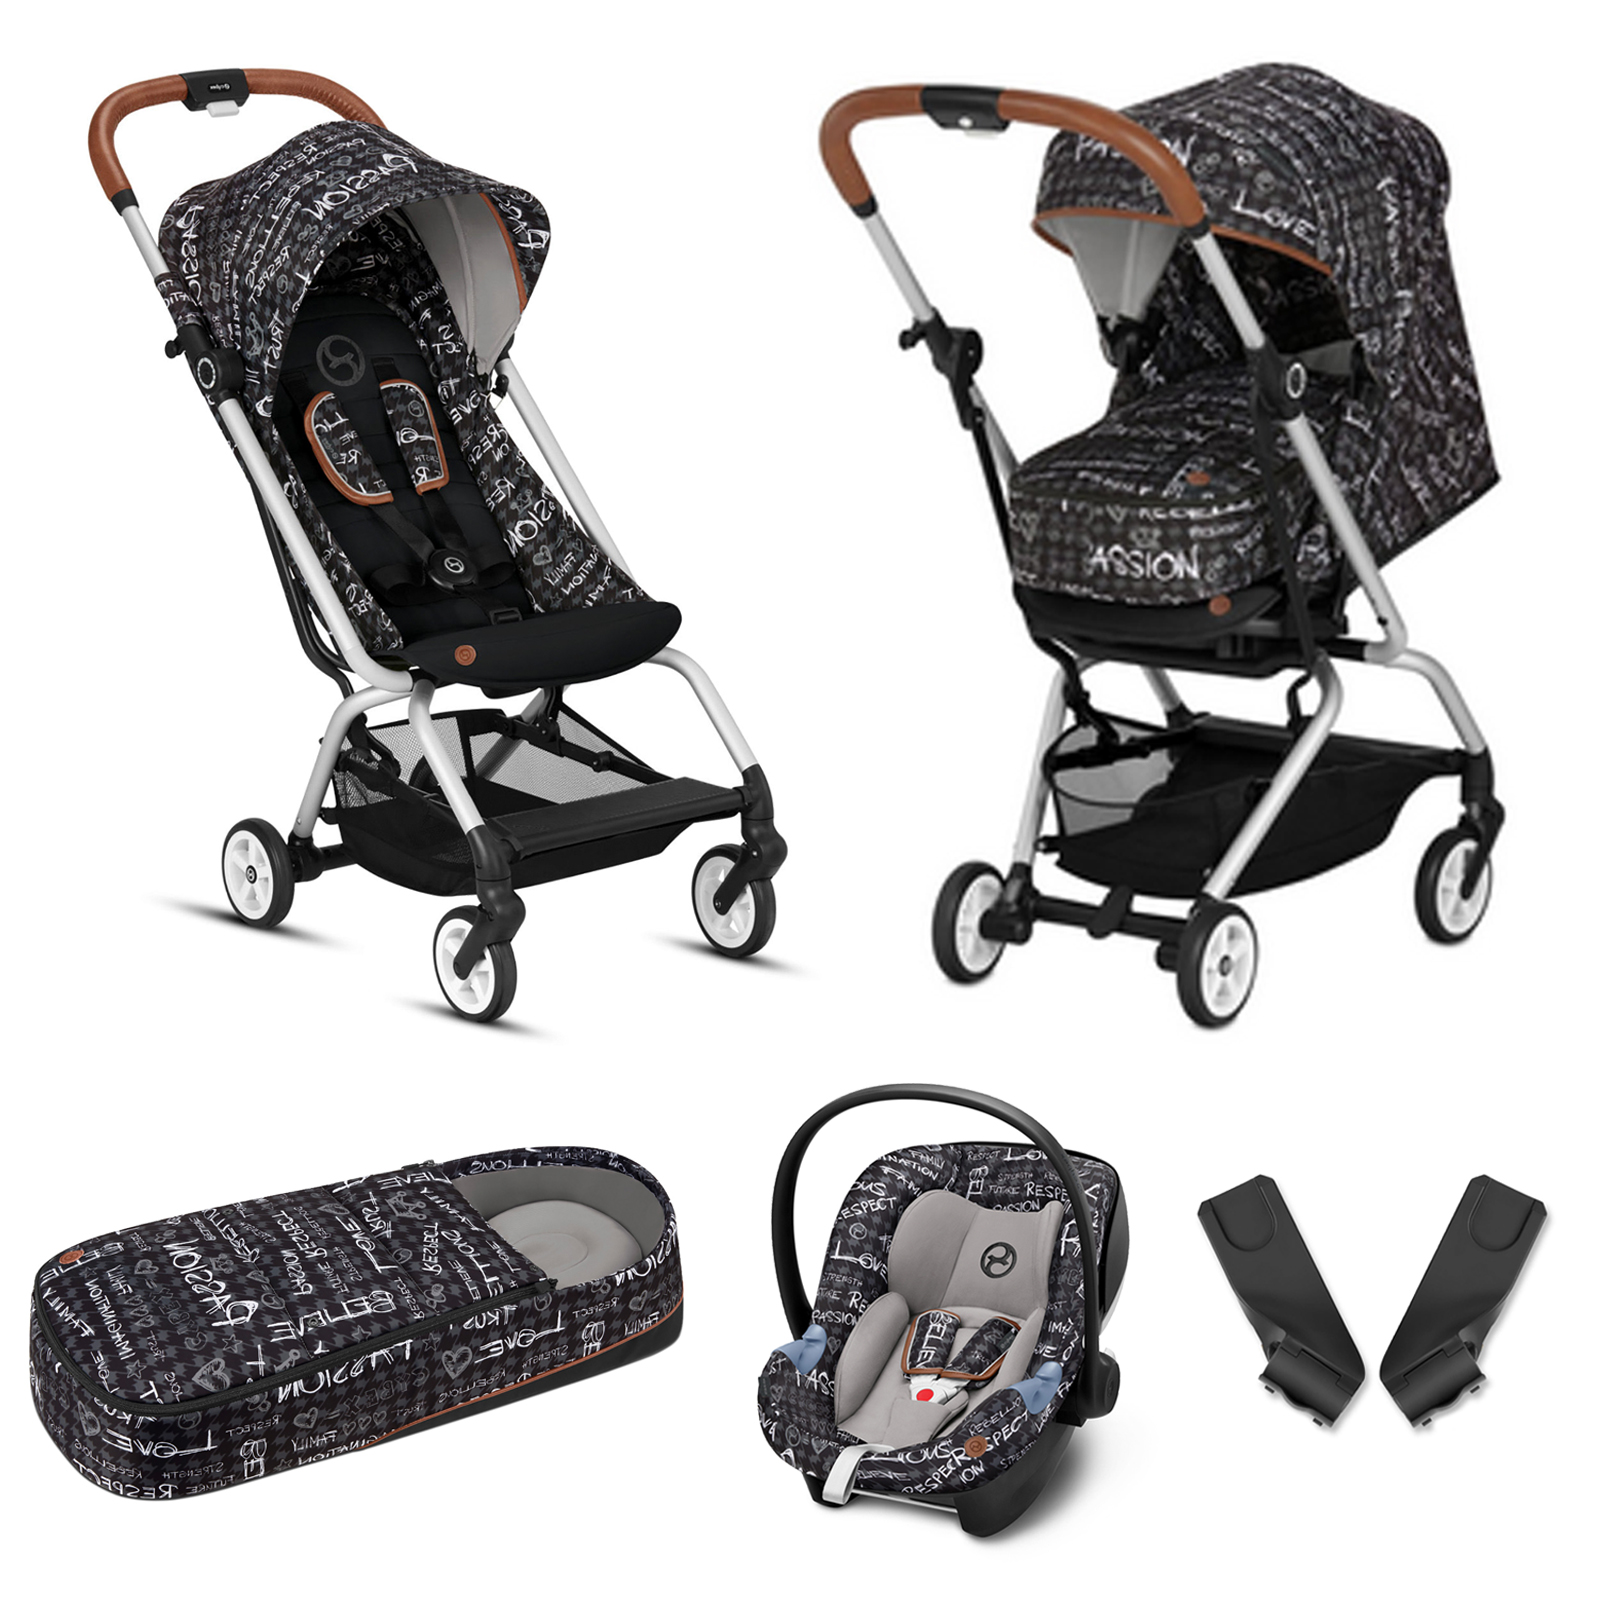 cybex aton m compatible strollers